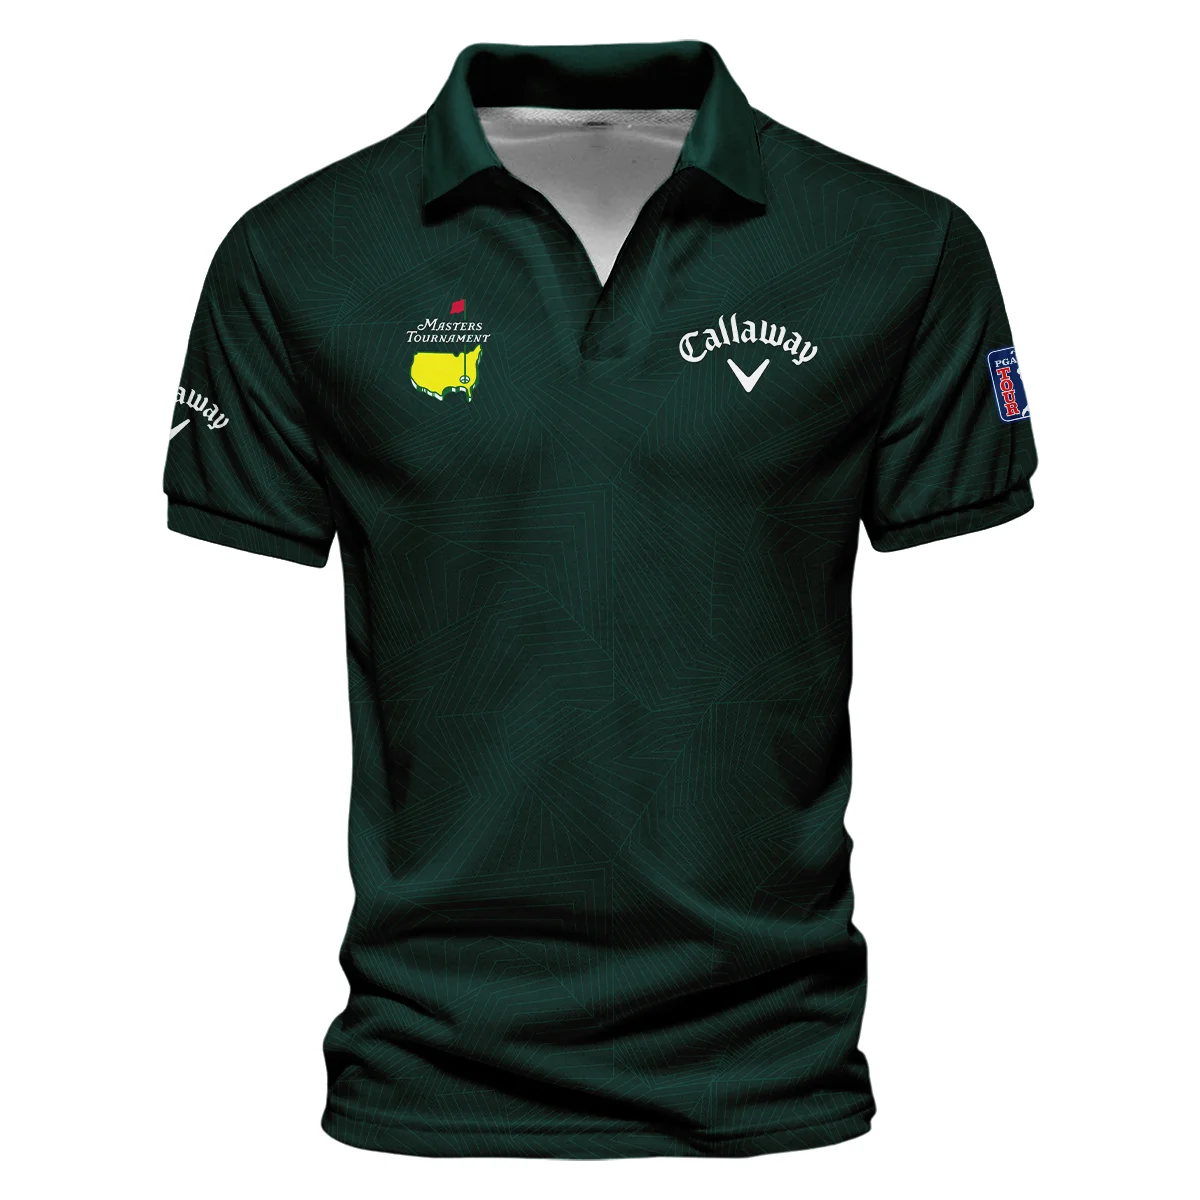 Masters Tournament Callaway Pattern Sport Jersey Dark Green Vneck Polo Shirt Style Classic Polo Shirt For Men